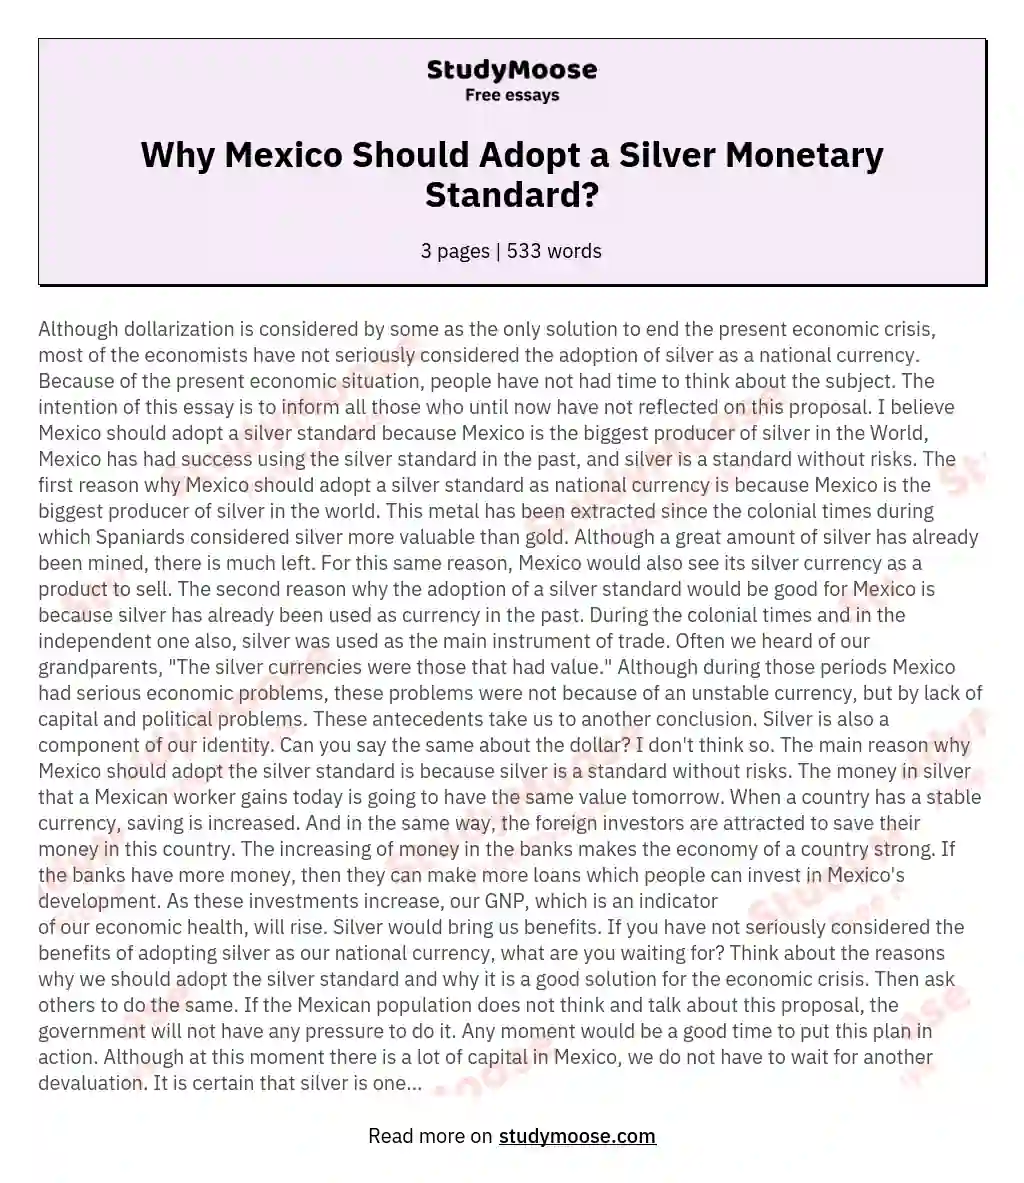 Why Mexico Should Adopt a Silver Monetary Standard? essay